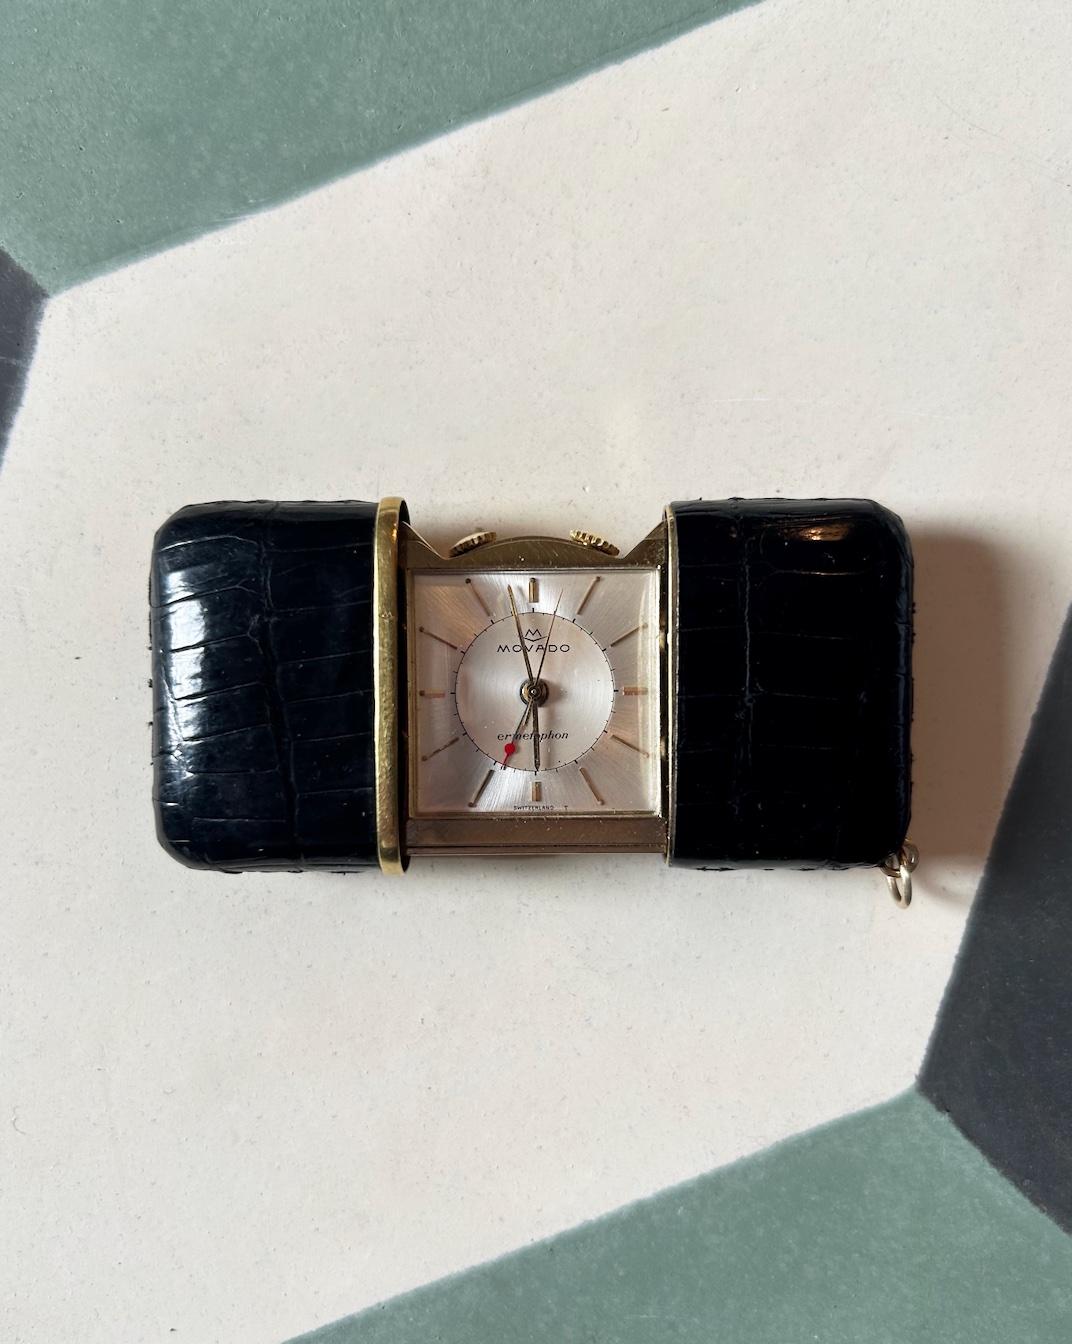 A Movado ‘Ermetophon’ purse watch with alarm. Black crocodile skin with git mounts. 1960s.
In excellent condition with code numbers punched on the back of the case and the original gilt metal strut, movement running well. 
Size open 76mm x 38mm.